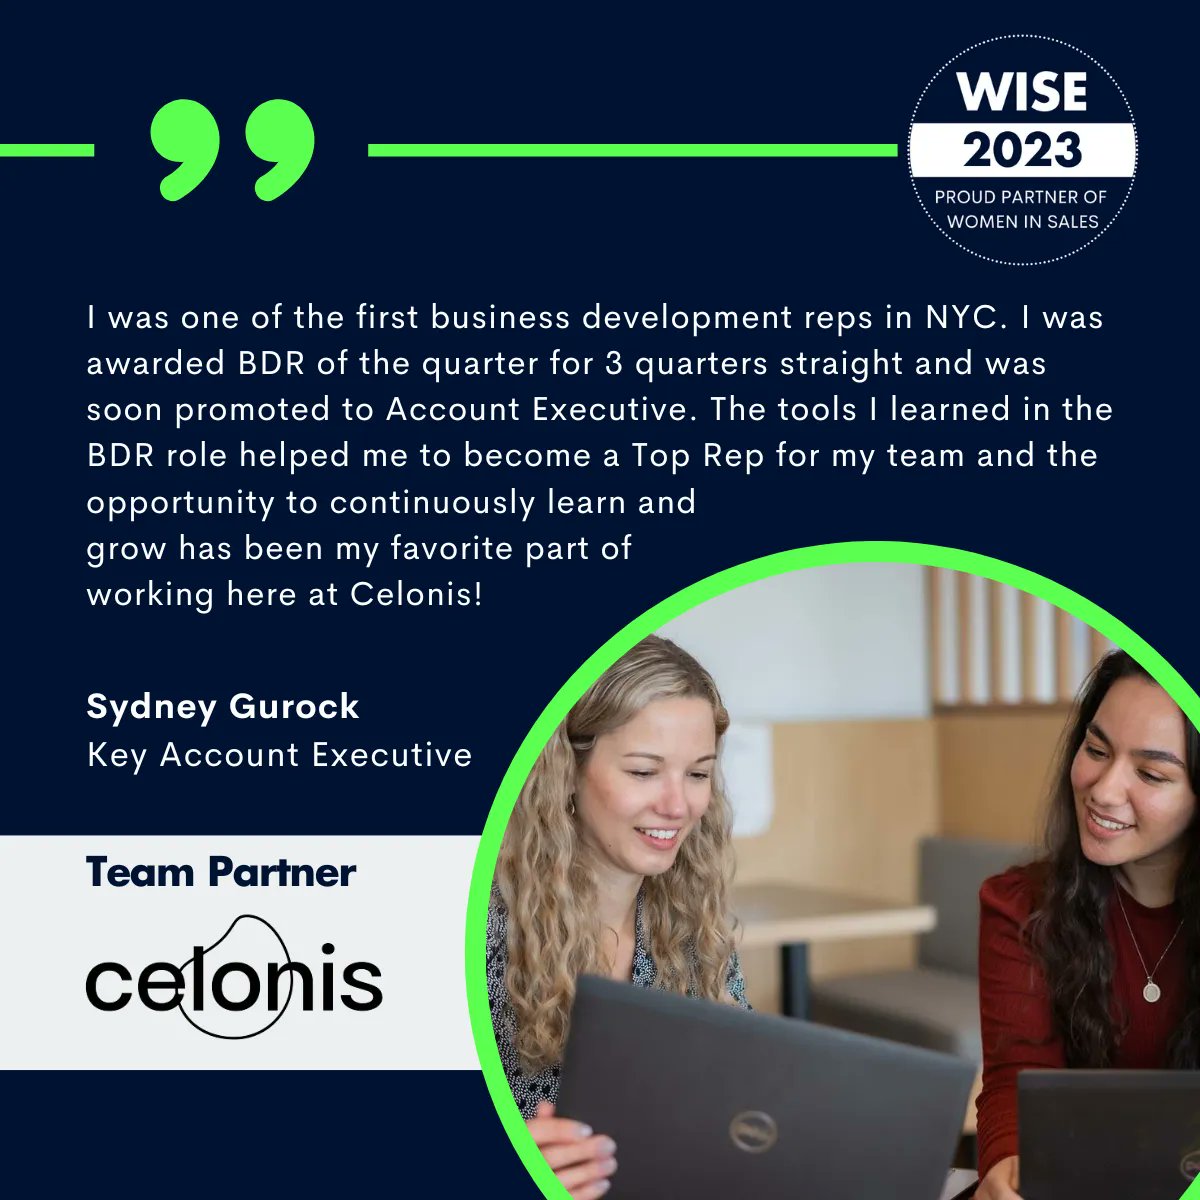 @Celonis, a process mining tool that finds and fixes hidden inefficiencies that empowers teams to reach new levels of performance, is our newest partner to join the WISE community! 🎉 Join their team here 👉 bit.ly/3CwlI7w 

#womeninsales #WISEwomen